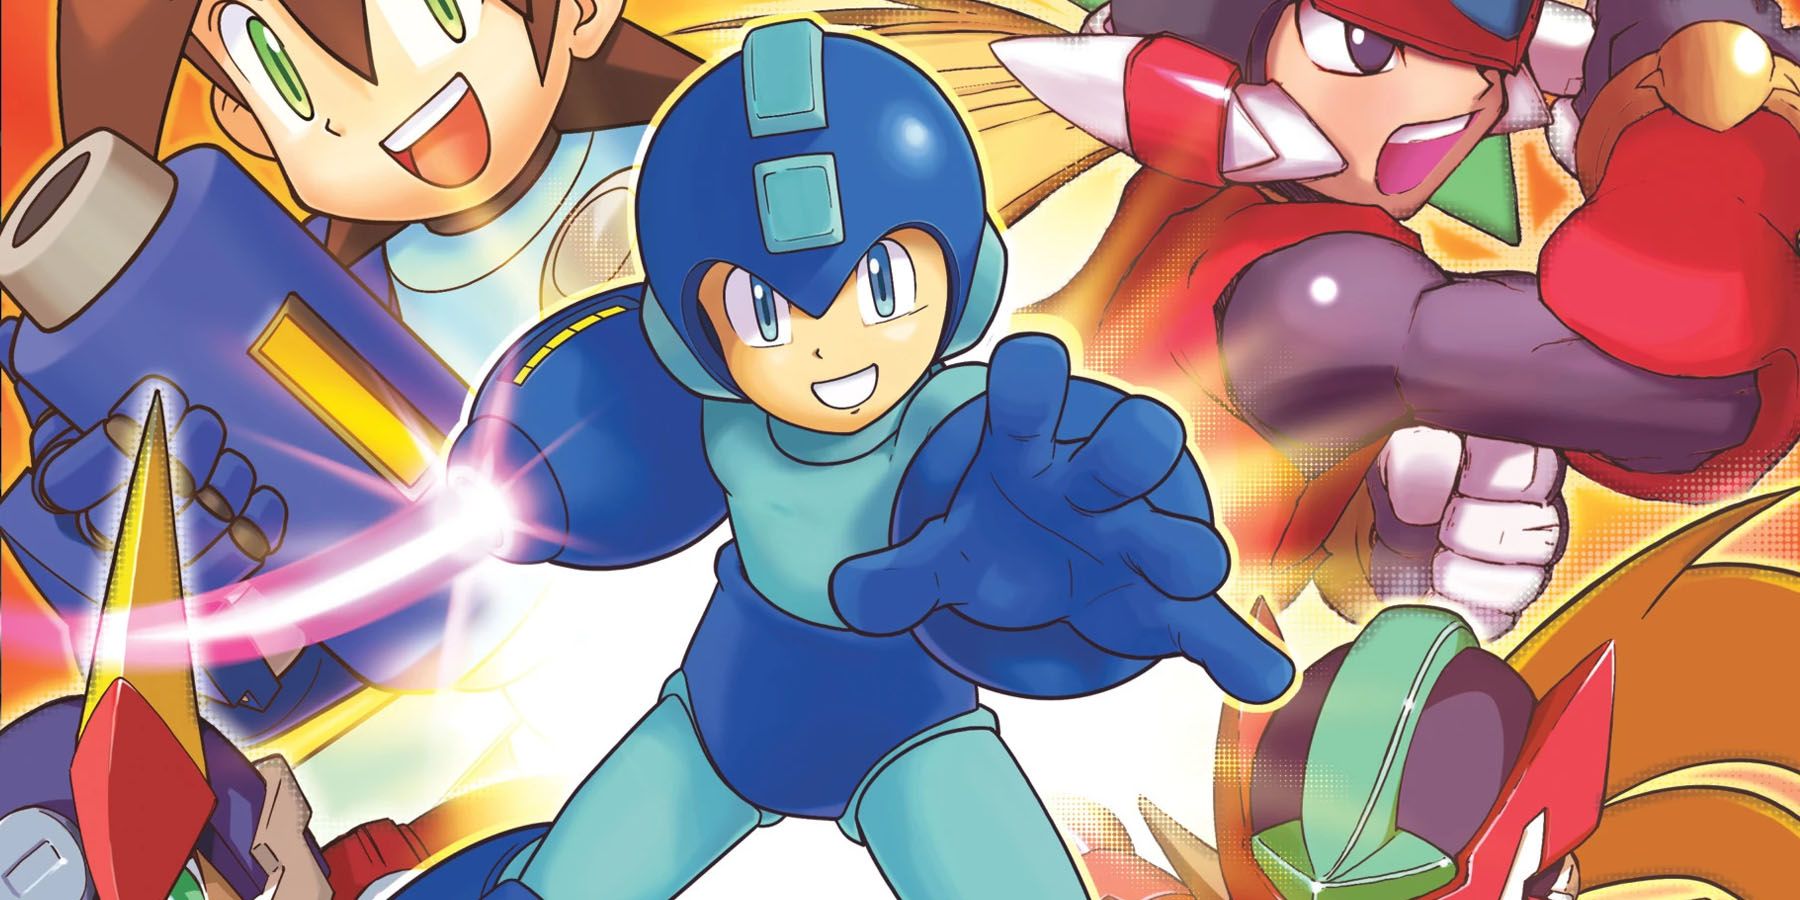 Rumor New Mega Man Game Could Be Revealed For 35th Anniversary